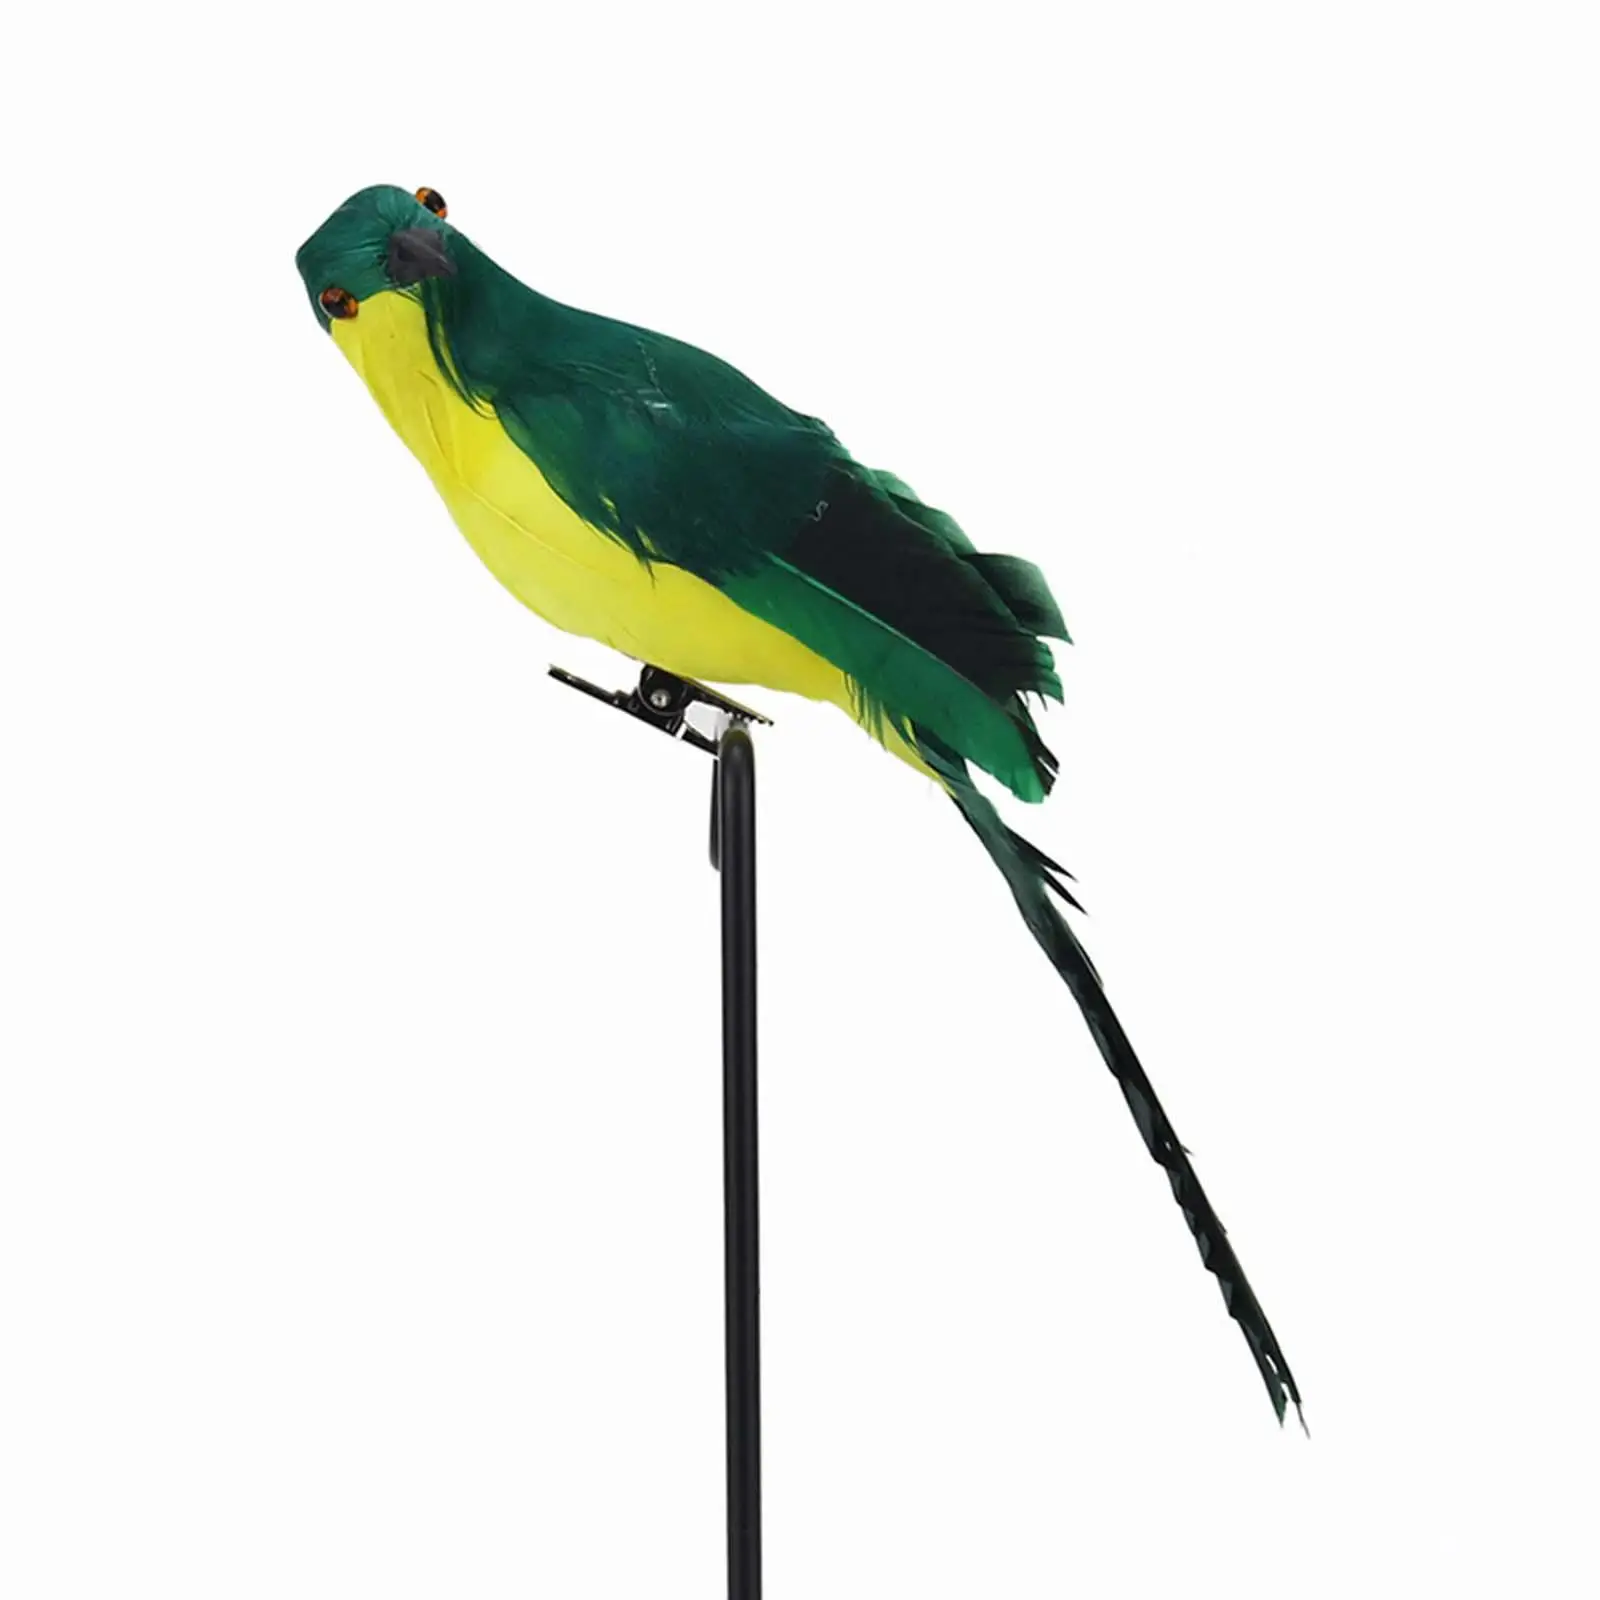  Artificial Birds Photography Props Model Sculpture Statue Feathered Parrot for Outdoor Crafts Porch Pathway Landscape Decor